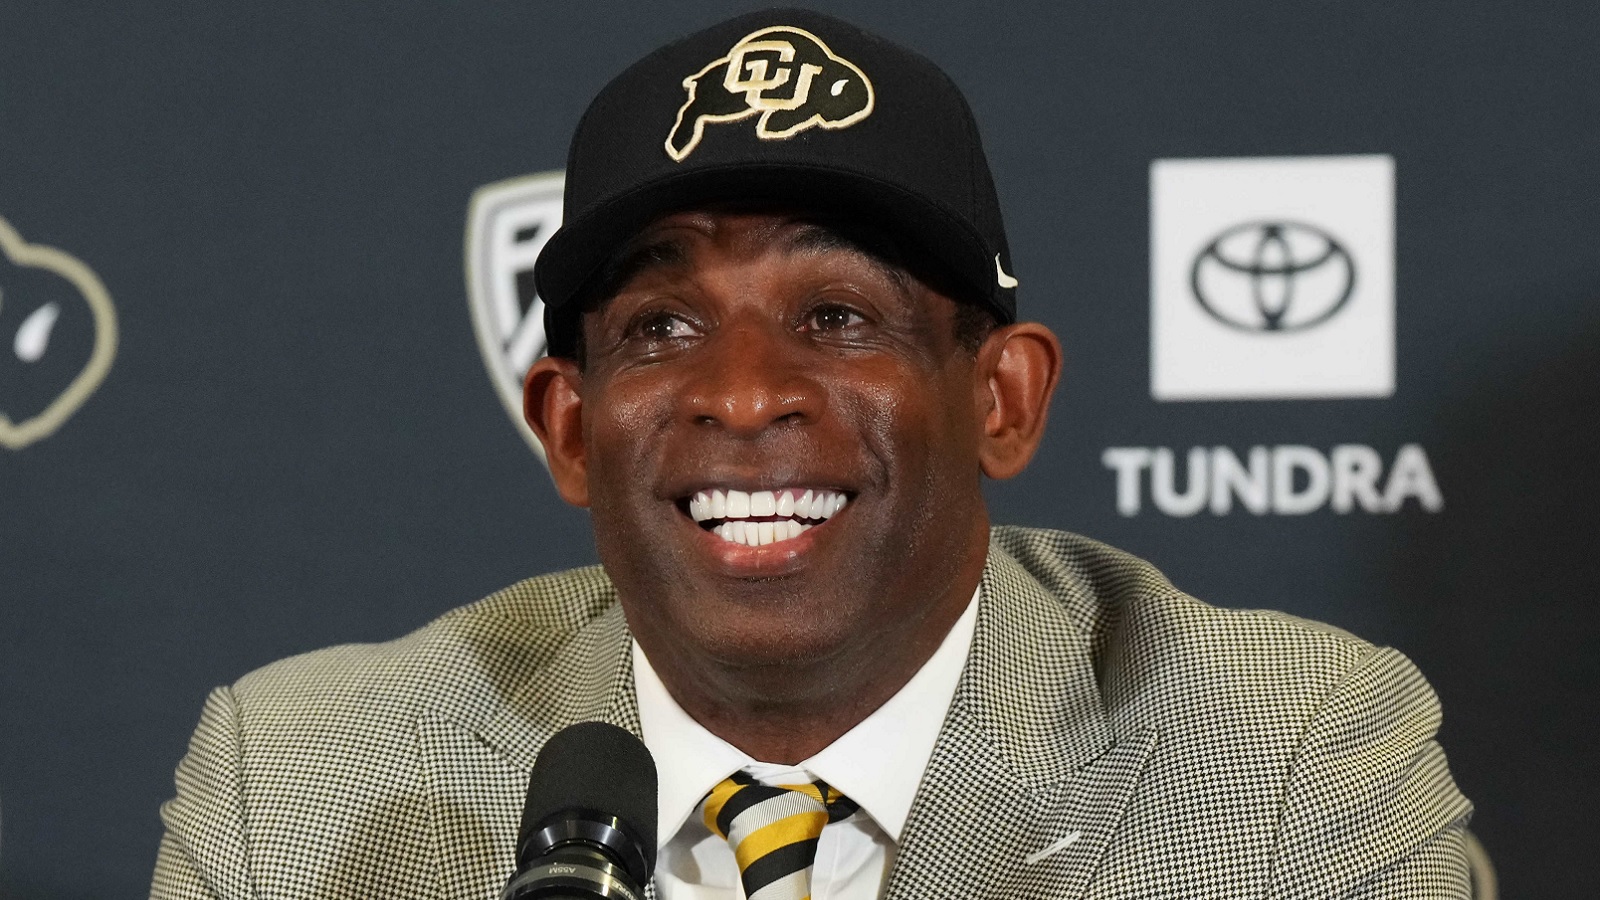 CU Buffs football assistant coach salary pool tops $4.5 million for first  time – BuffZone